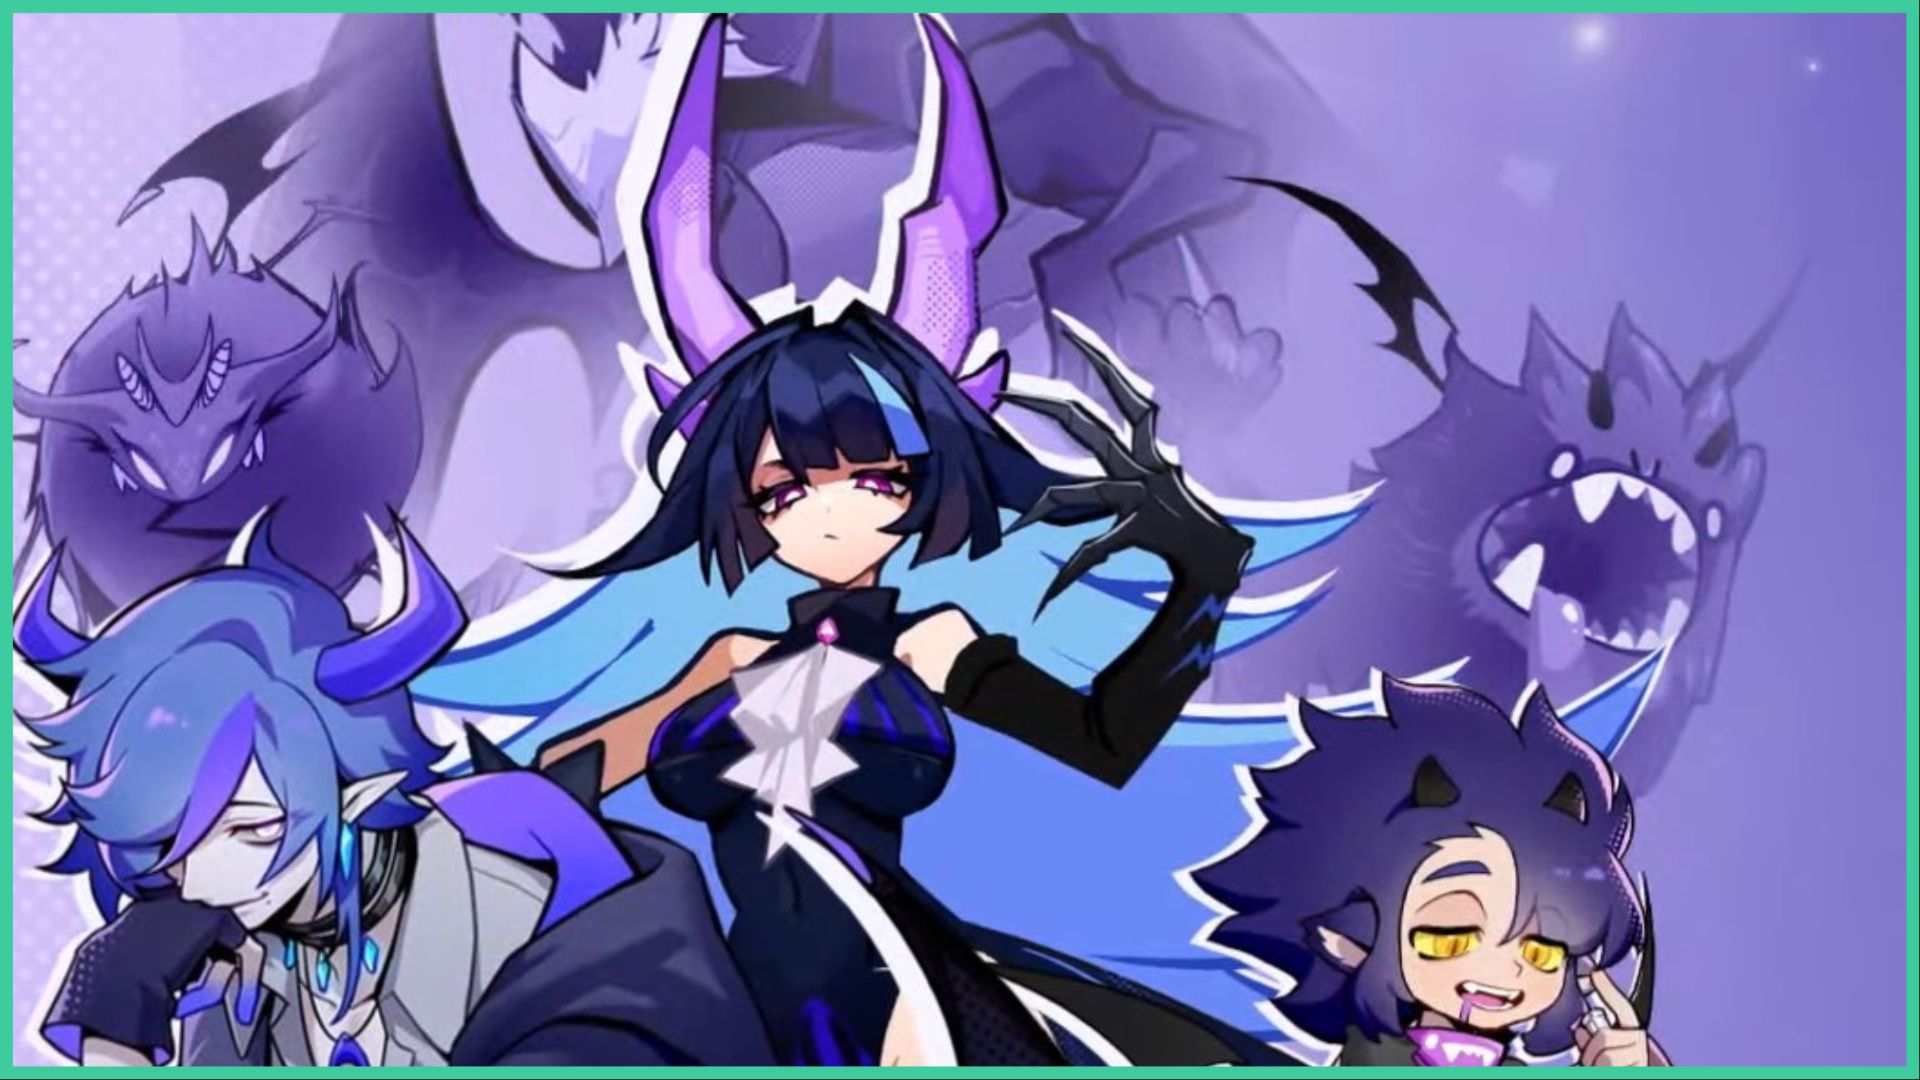 feature image for our dragon pow codes guide, the image features promo art for the game with anime-style characters. A girl with claws and large purple horns, with a male character sat down in front of her resting his head on her hands, he also has horns, and a smaller troll-like character with messy hair, animal ears, and small black horns, there are drawings of purple monsters in the background